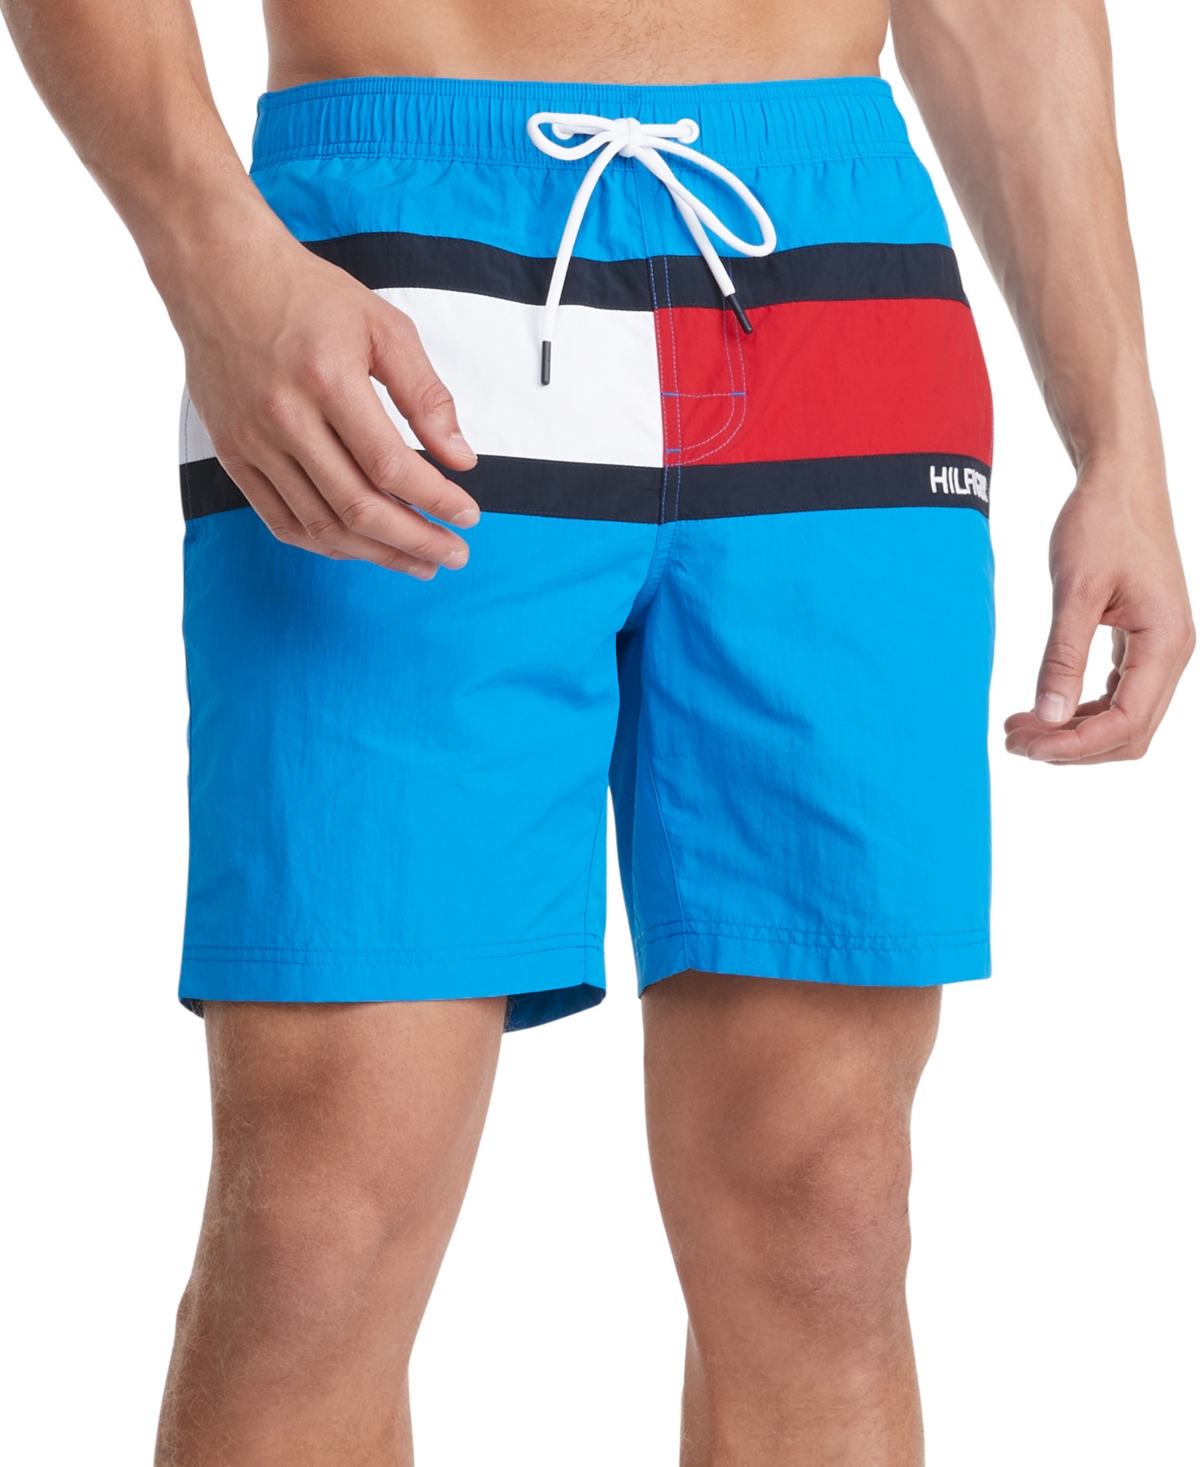 Tommy Hilfiger Men's Tommy Flag 6.5" Swim Trunks, Created for Macy's